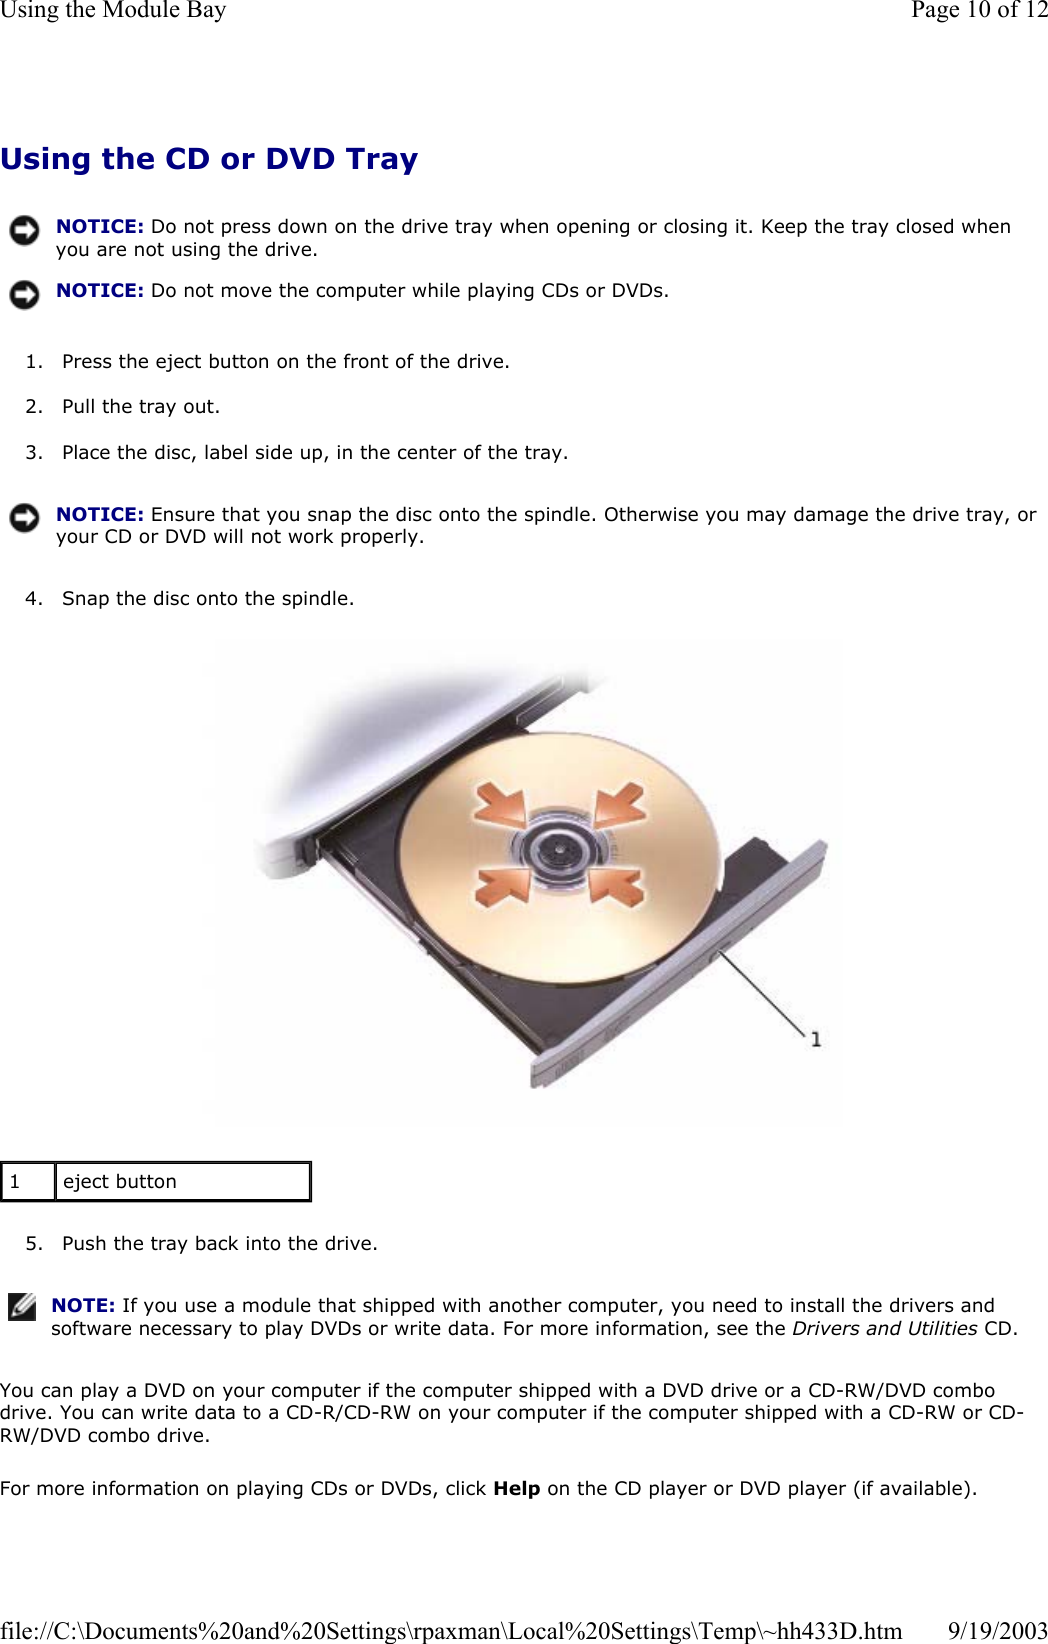 Using the CD or DVD Tray 1. Press the eject button on the front of the drive.  2. Pull the tray out.  3. Place the disc, label side up, in the center of the tray.  4. Snap the disc onto the spindle.    5. Push the tray back into the drive.  You can play a DVD on your computer if the computer shipped with a DVD drive or a CD-RW/DVD combo drive. You can write data to a CD-R/CD-RW on your computer if the computer shipped with a CD-RW or CD-RW/DVD combo drive. For more information on playing CDs or DVDs, click Help on the CD player or DVD player (if available). NOTICE: Do not press down on the drive tray when opening or closing it. Keep the tray closed when you are not using the drive.NOTICE: Do not move the computer while playing CDs or DVDs.NOTICE: Ensure that you snap the disc onto the spindle. Otherwise you may damage the drive tray, or your CD or DVD will not work properly.1  eject button NOTE: If you use a module that shipped with another computer, you need to install the drivers and software necessary to play DVDs or write data. For more information, see the Drivers and Utilities CD.Page 10 of 12Using the Module Bay9/19/2003file://C:\Documents%20and%20Settings\rpaxman\Local%20Settings\Temp\~hh433D.htm